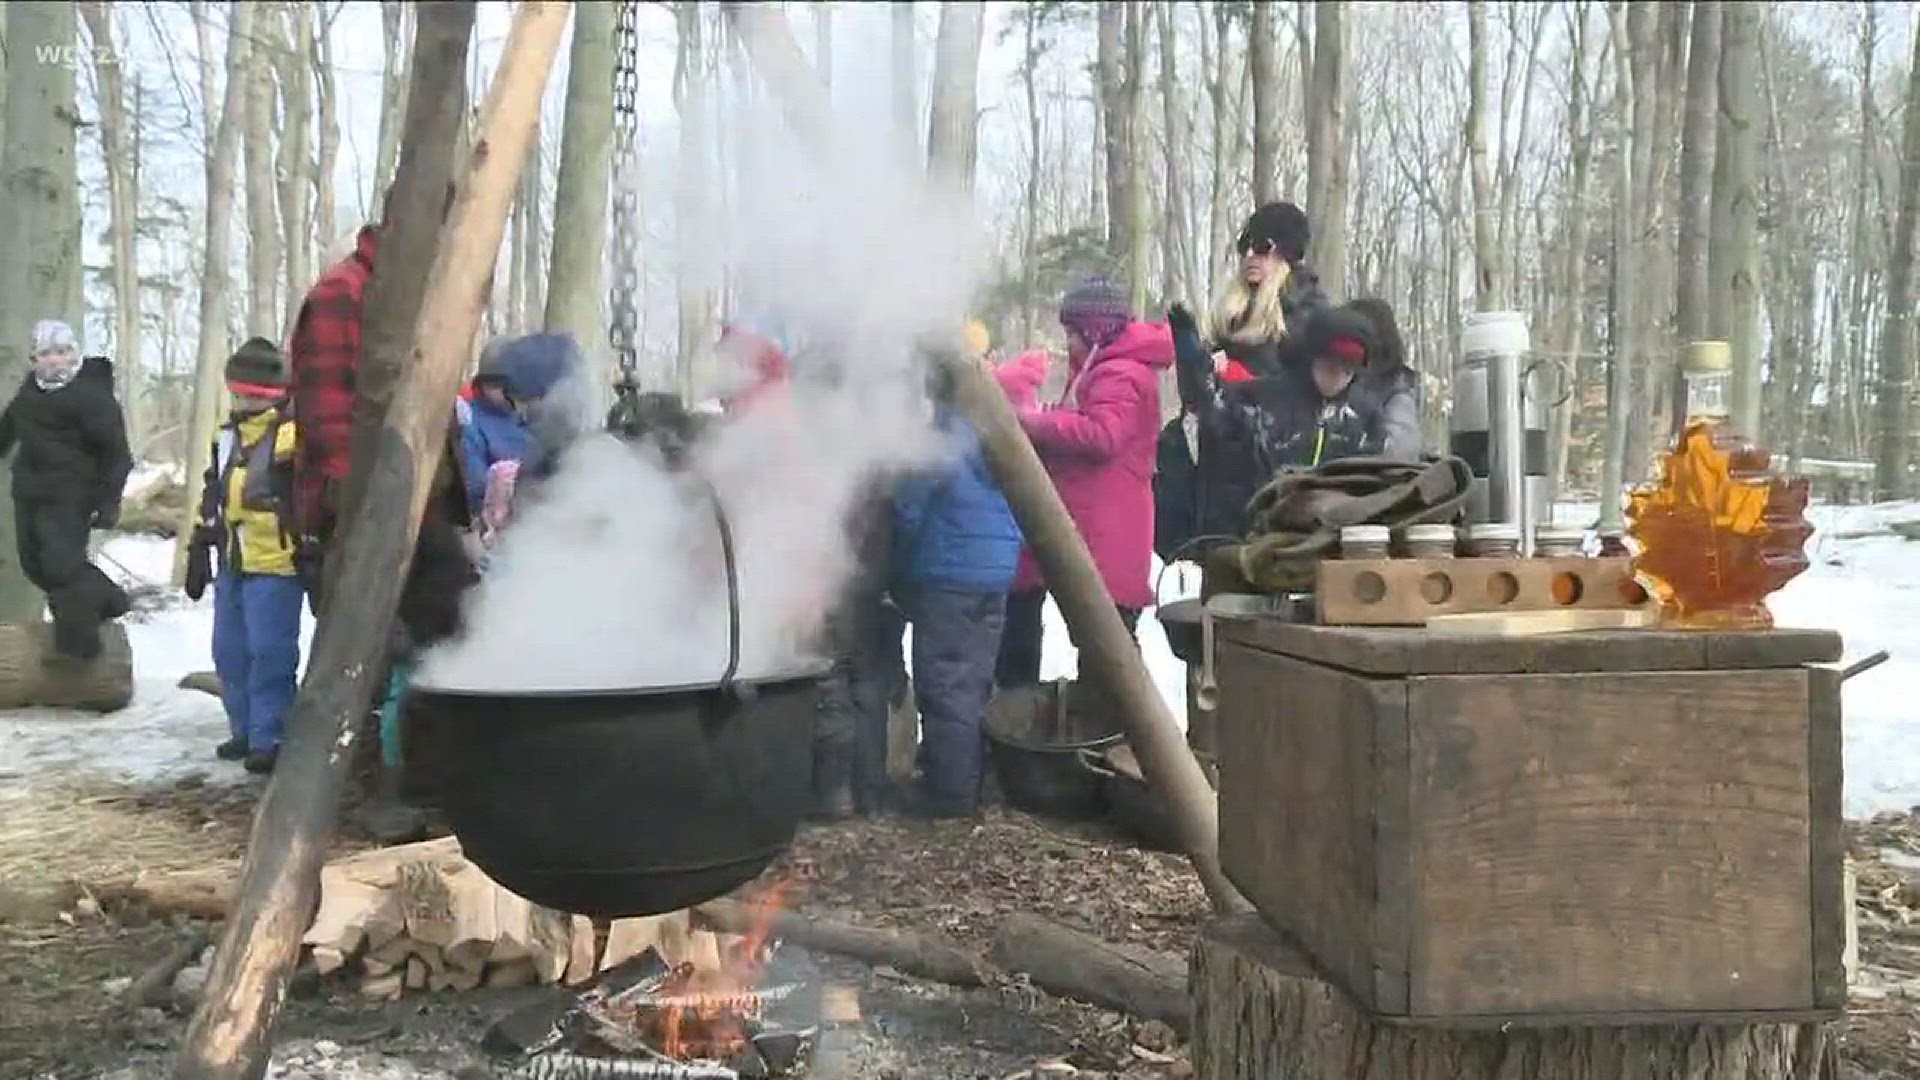 Terry Belke shows us how maple sugaring is being used as a teaching tool for kids in Western New York.